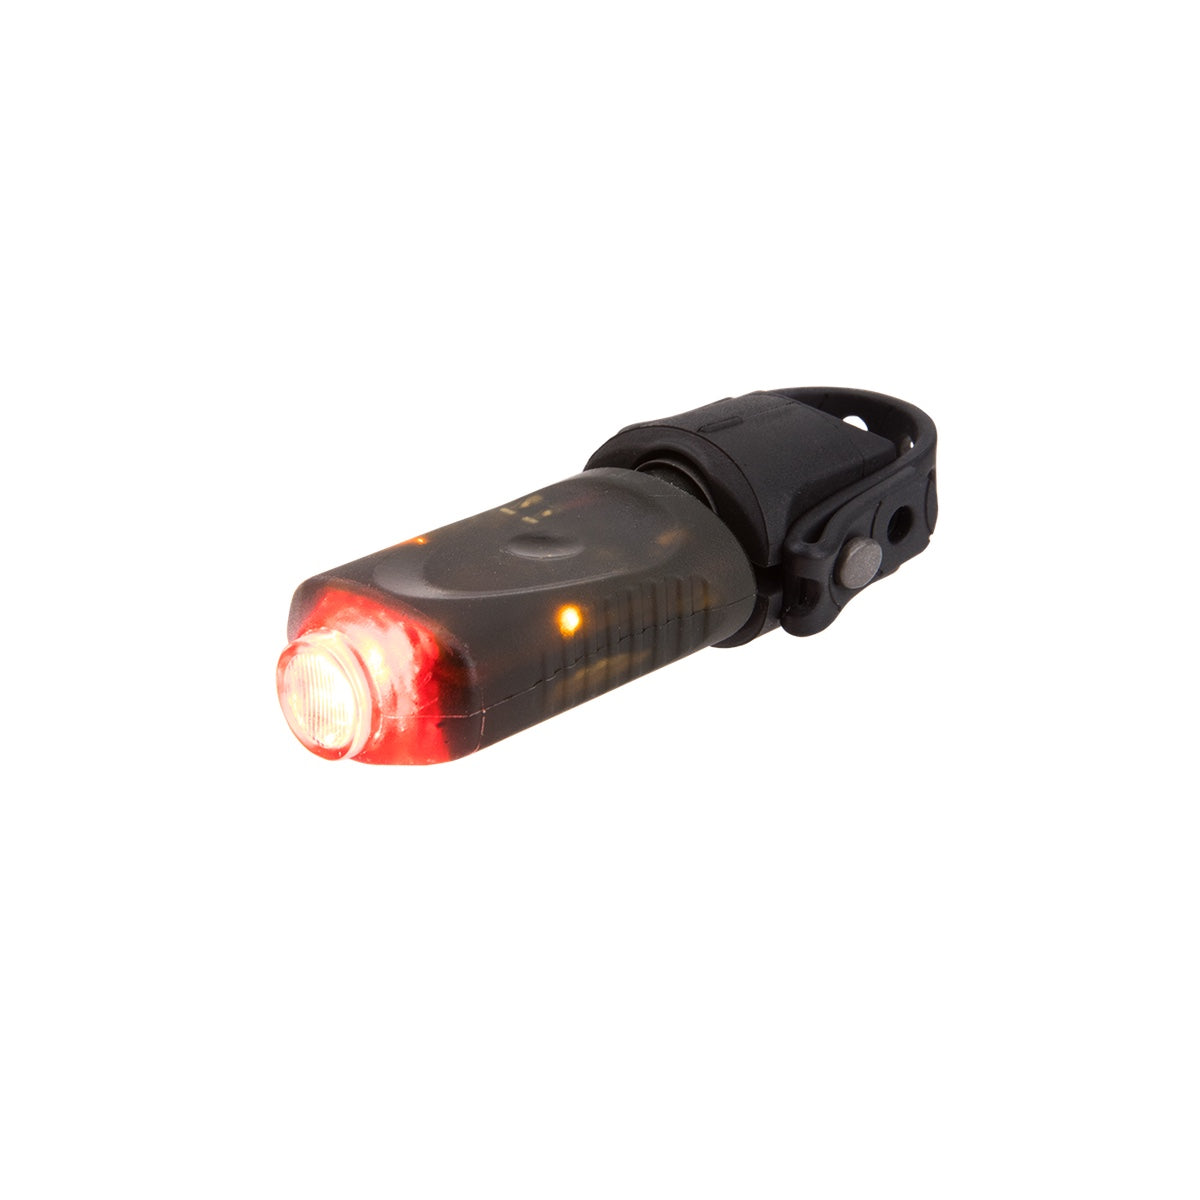 Light and Motion Bike Lights Visibility When You Need It!